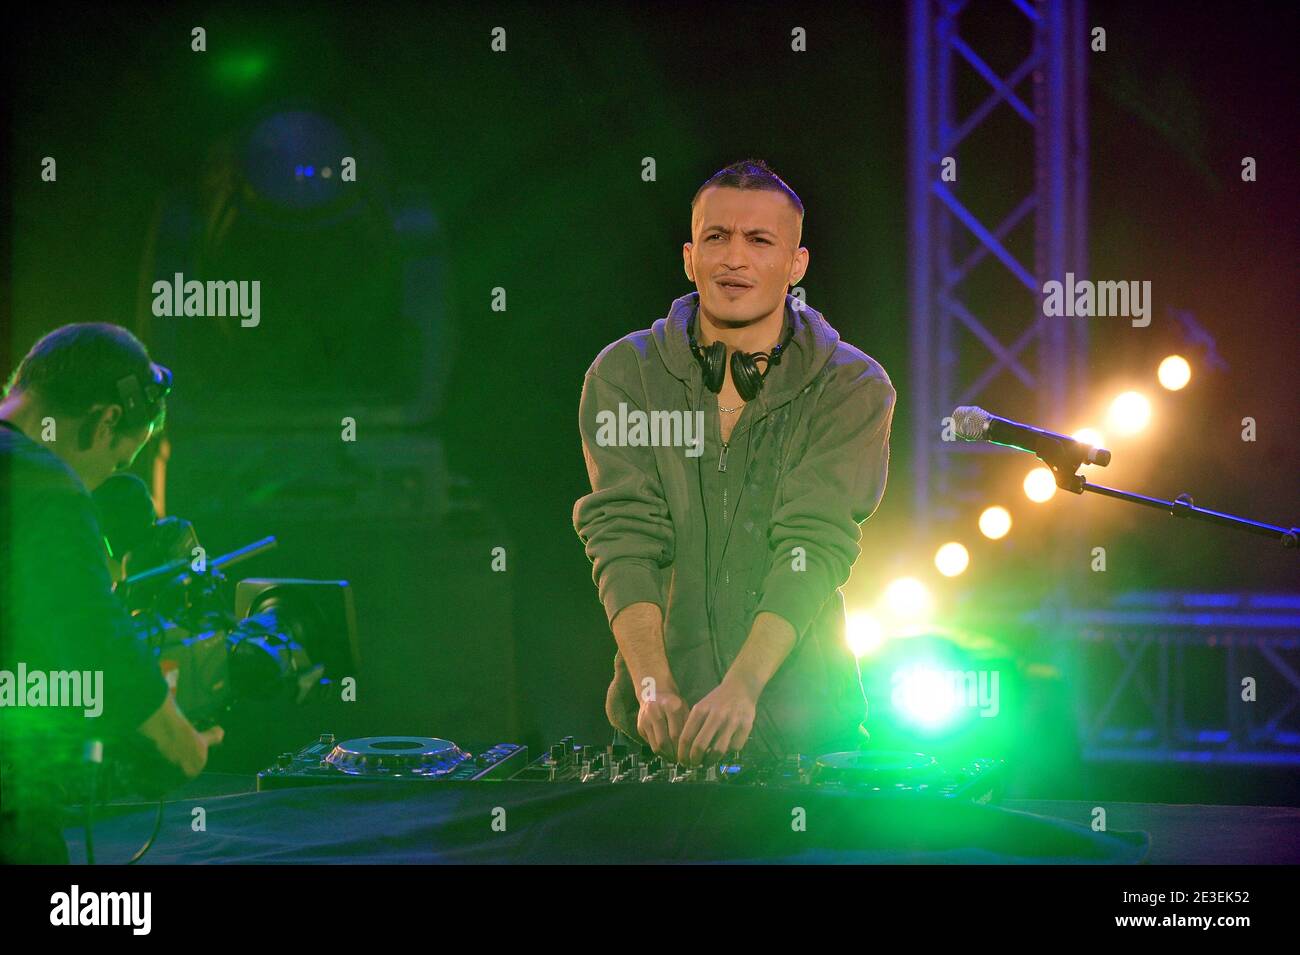 EXCLUSIVE. DJ Hakimakli performs during 'M6 Music Live' concert helt at  L'olympia in Paris, France, on January 29, 2009. M6 Misoc Live tour will be  in Lyon¿on march 7, in Strasbourg on